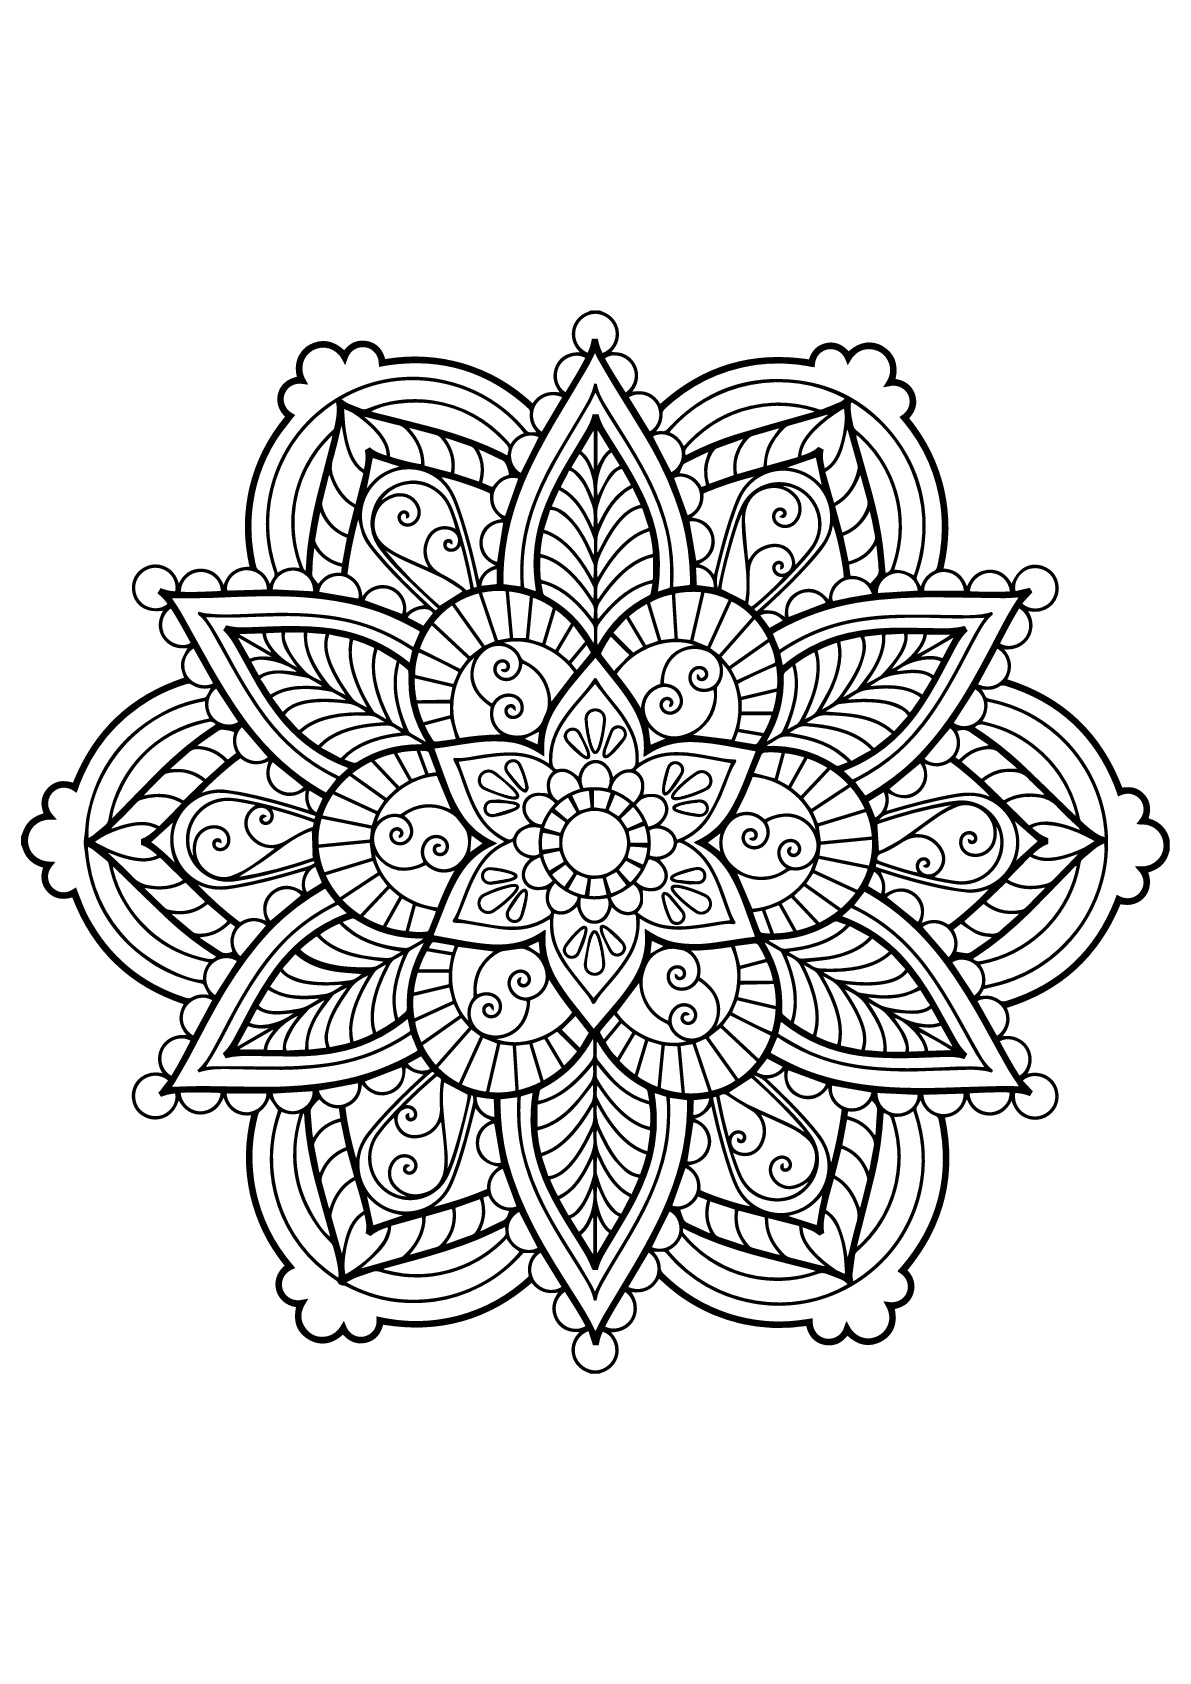 https://www.justcolor.net/wp-content/uploads/sites/1/nggallery/mandalas/mandala-from-free-coloring-book-for-adults-28.jpg